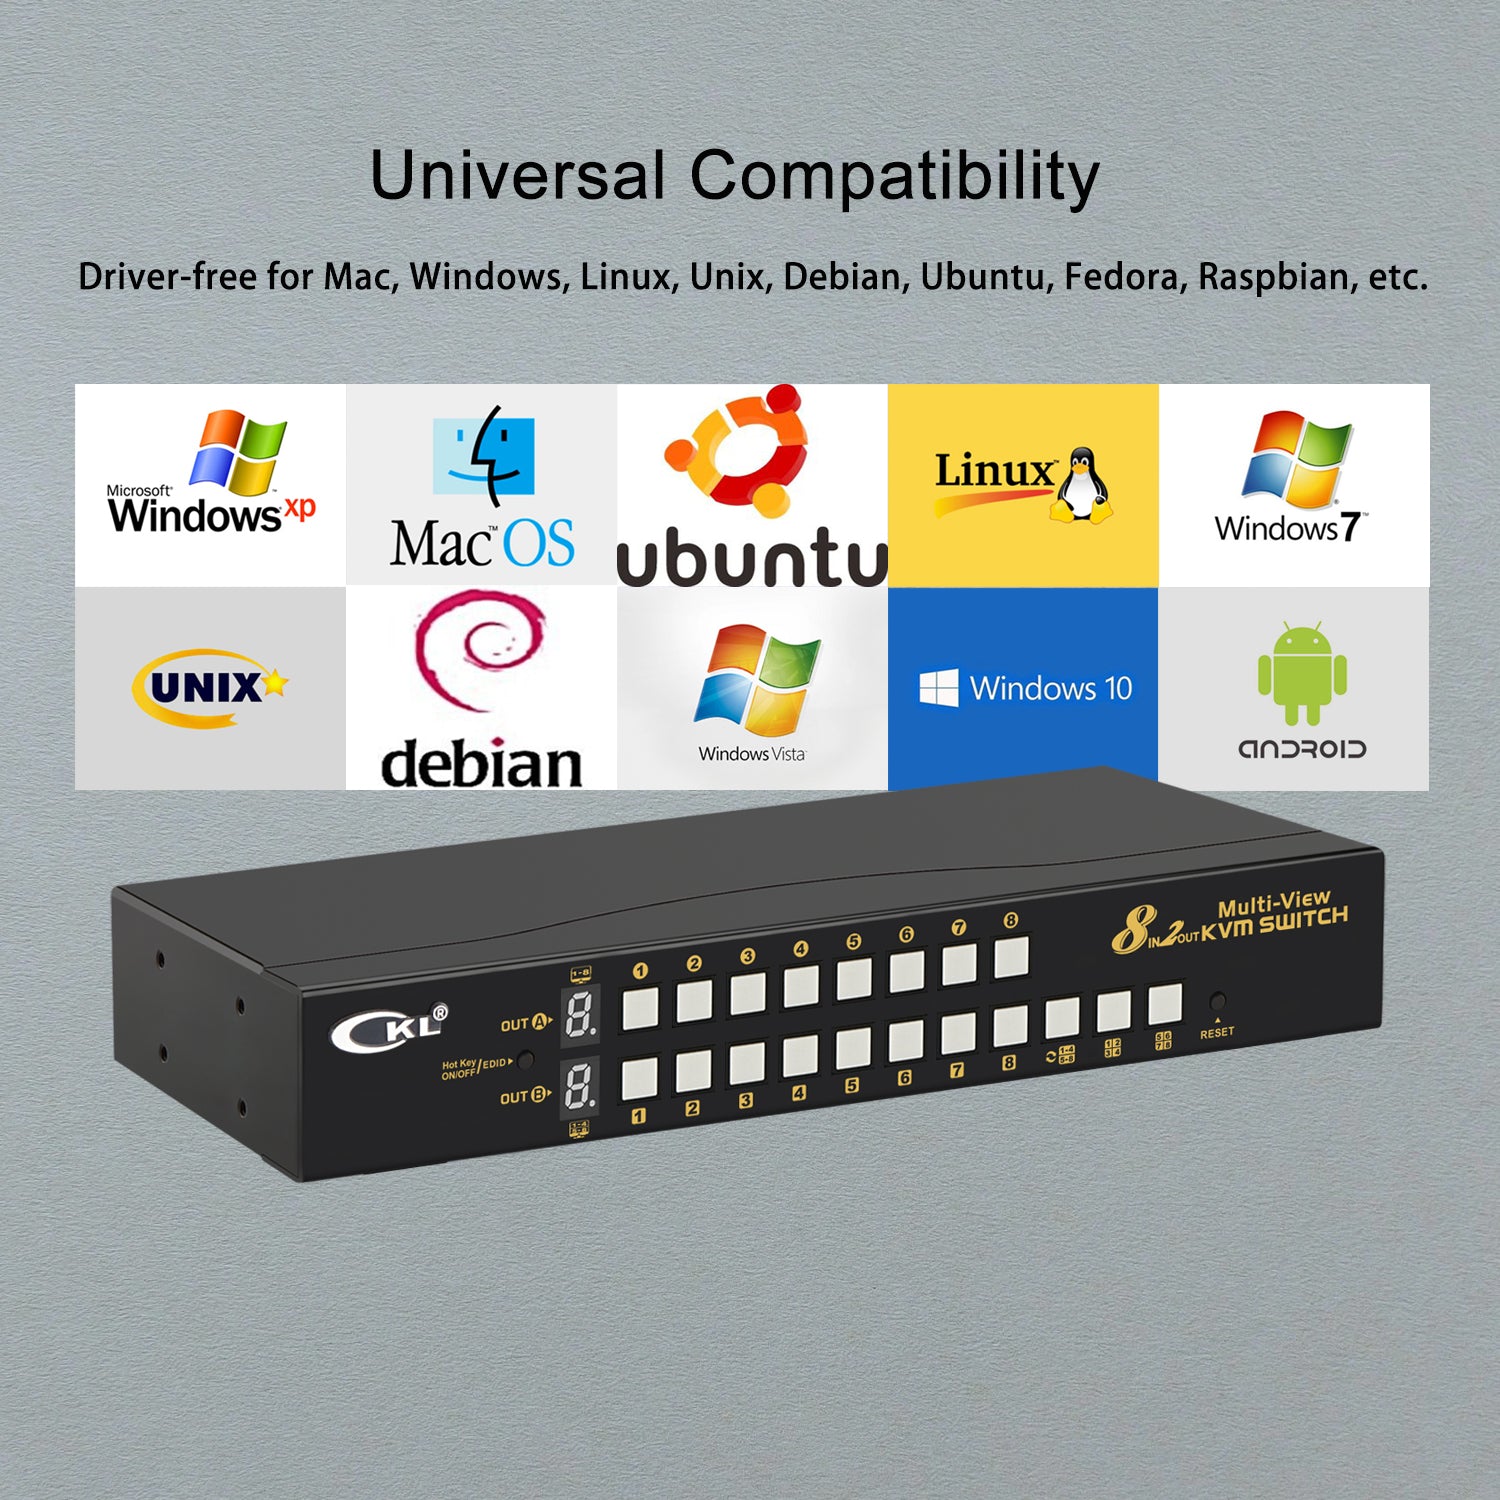 CKL 8 Port Multi-view KVM Switch Dual Monitor 4K@30Hz, Supports 1 Multi-vewer and 1 Single View Display, Hotkey and Wired Remote (82MVKVM)